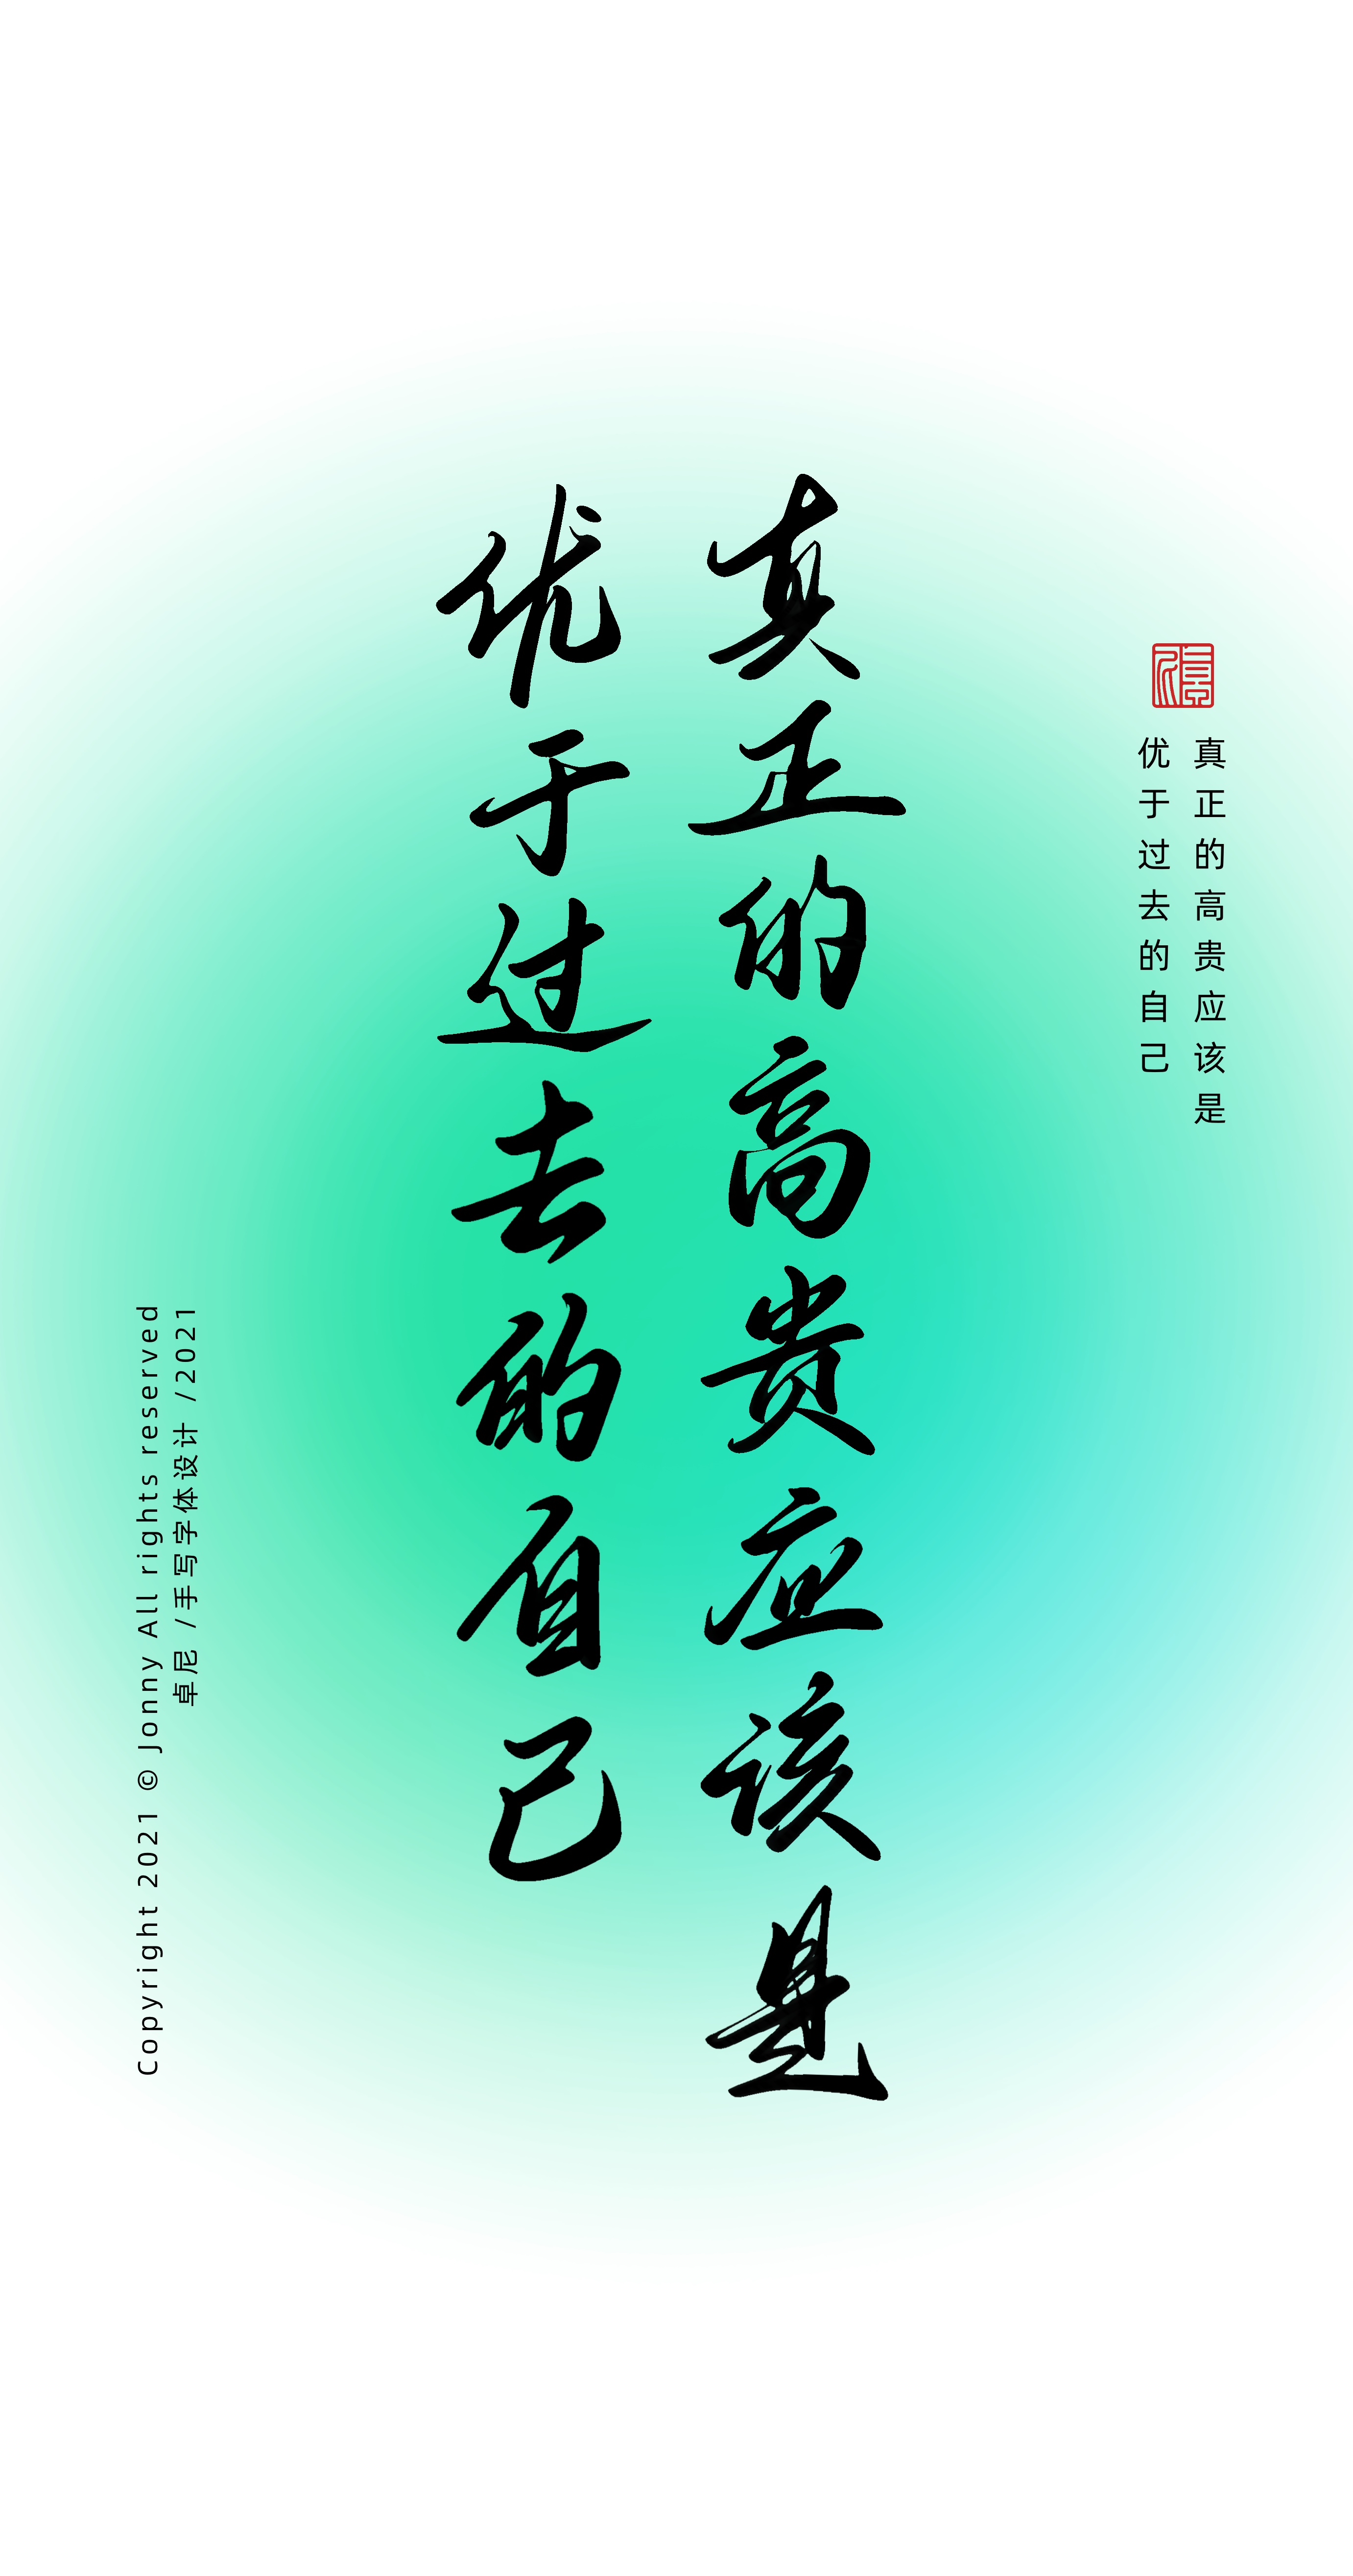 16P Collection of the latest Chinese font design schemes in 2021 #.573